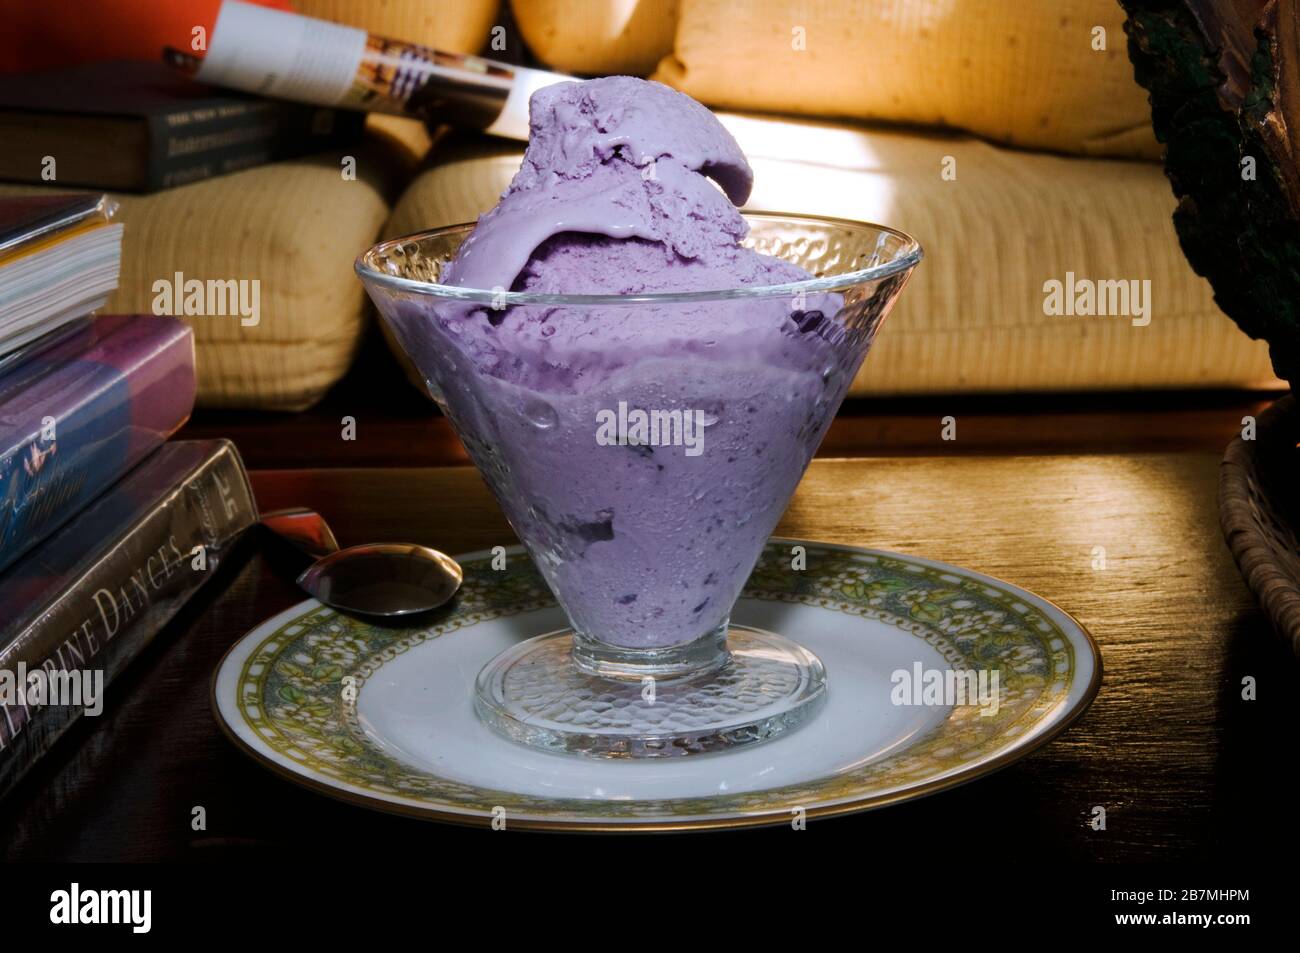 Ice cream is a frozen dairy dessert made with milk or cream and in a variety of flavors. Always a yummy treat. This is purple yam flavored ice cream. Stock Photo